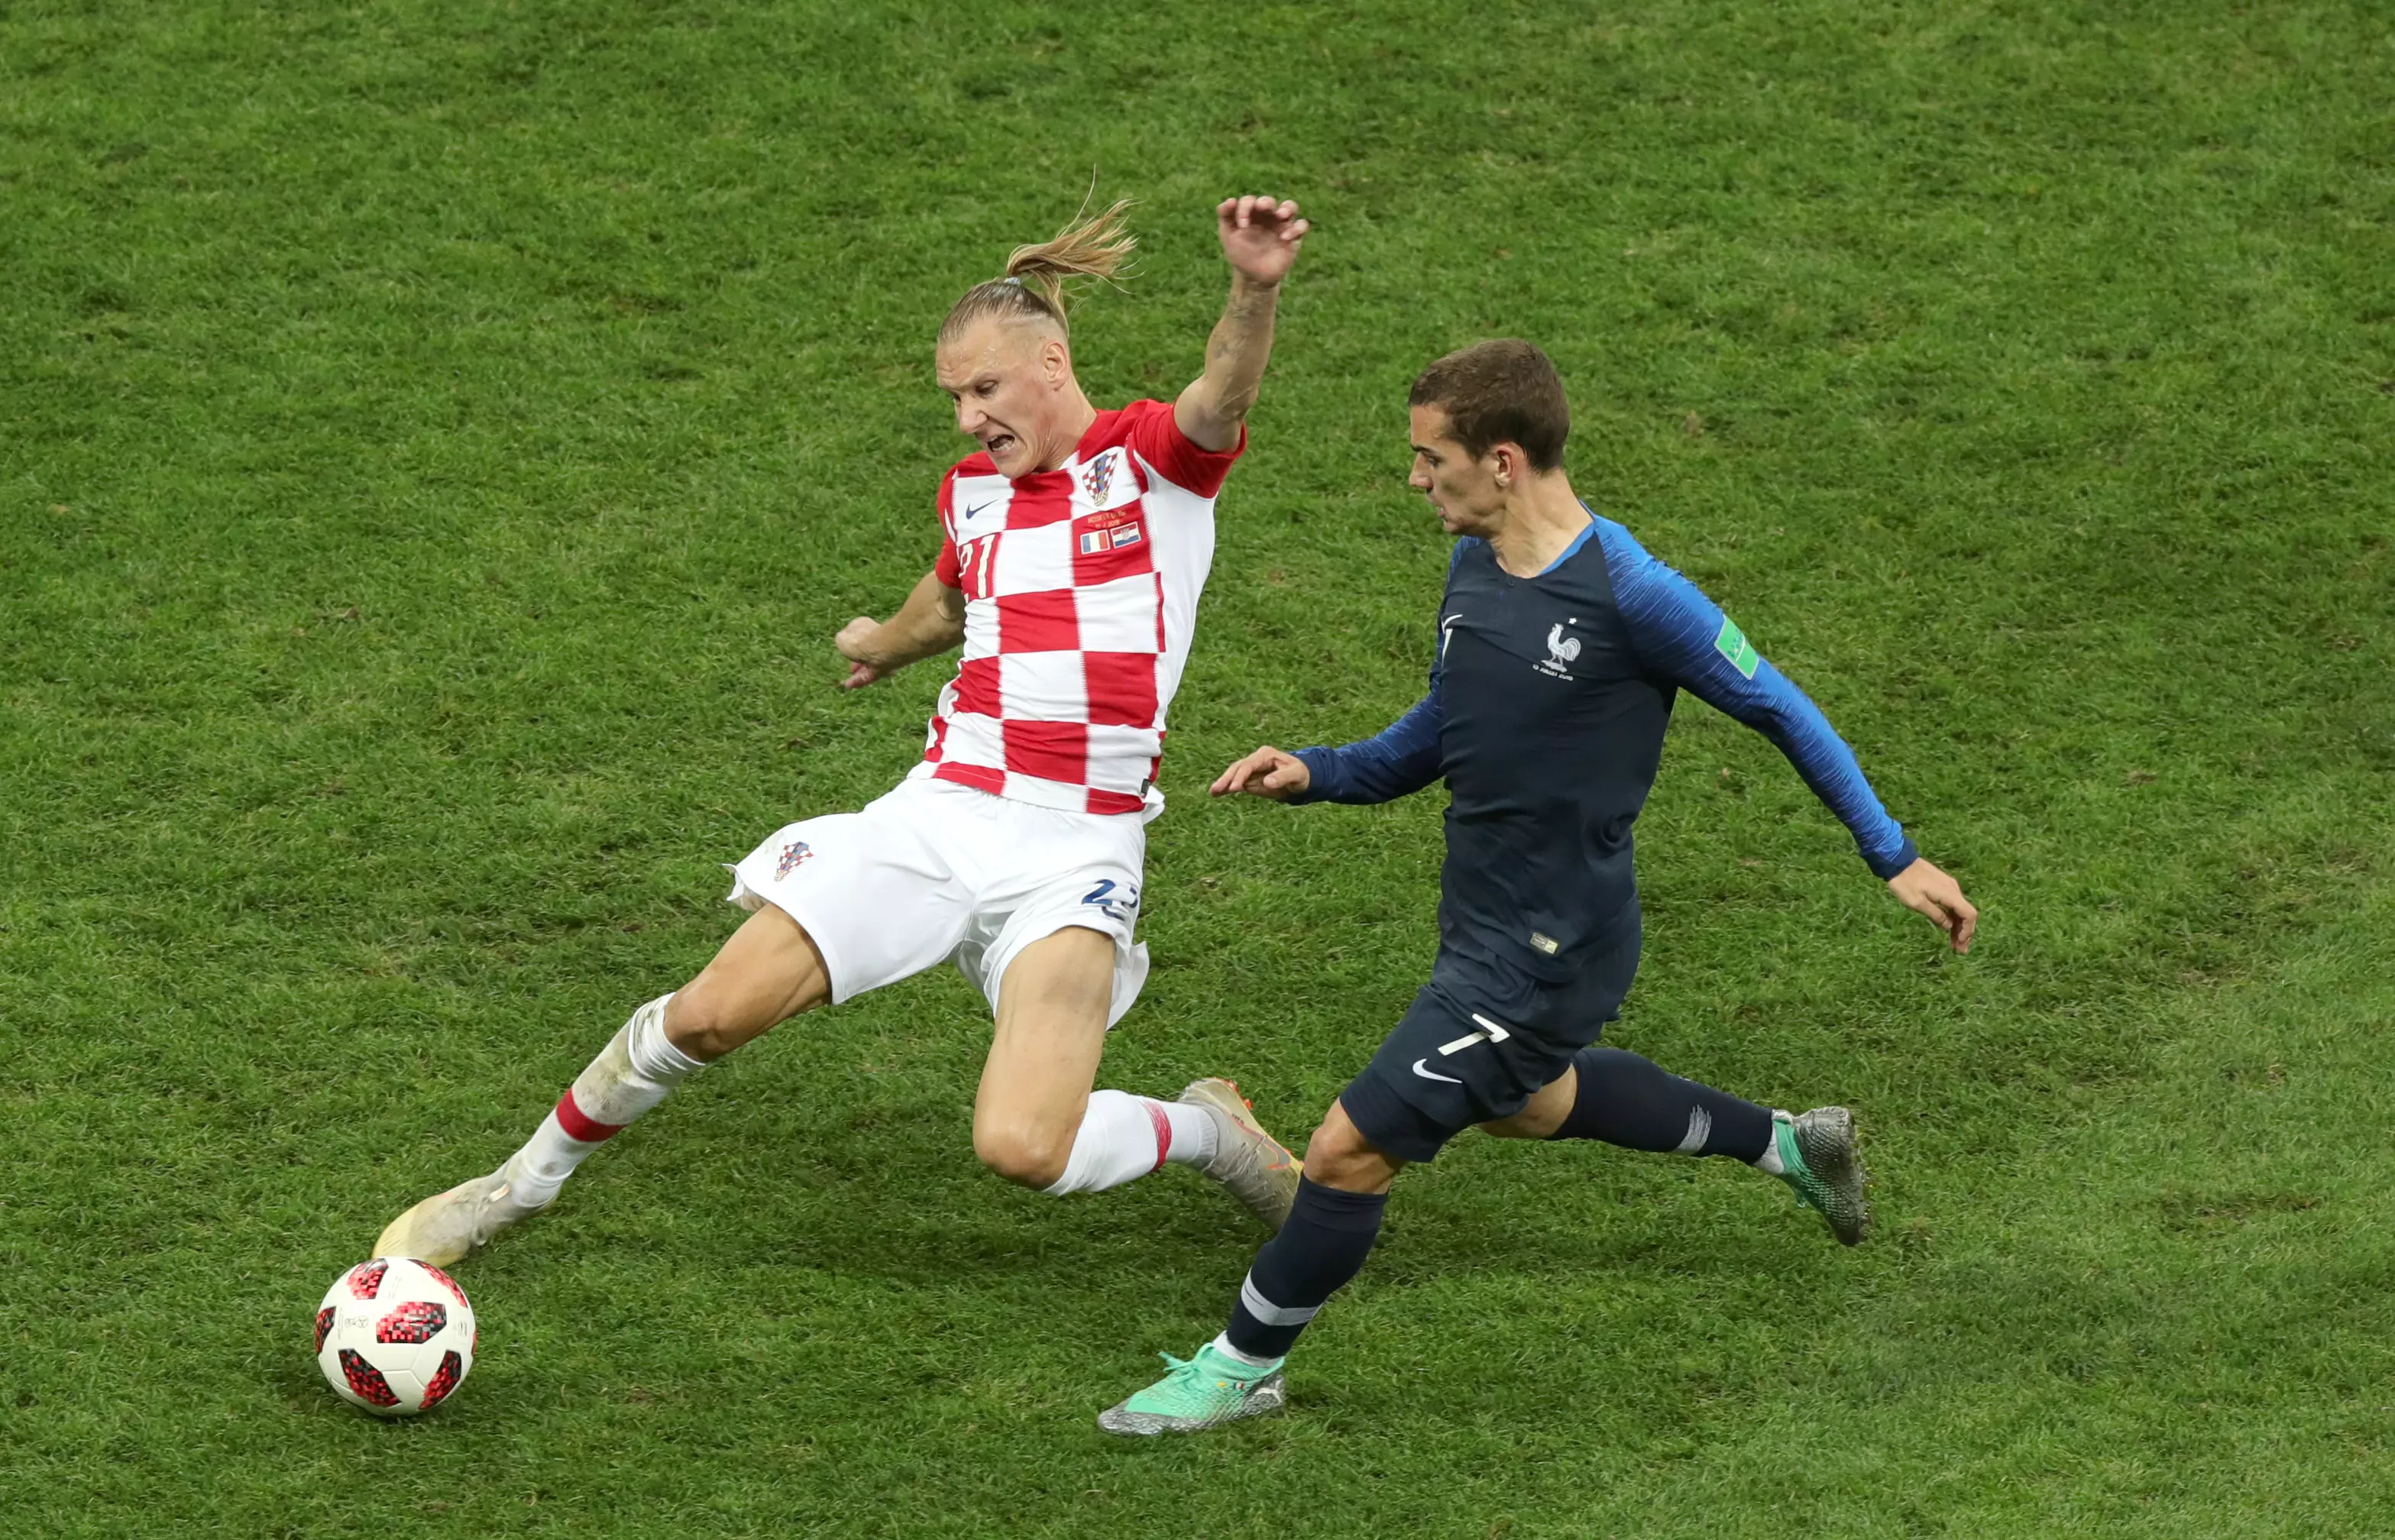 Vida was one of Croatia's best players at the 2018 World Cup. Image: PA Images